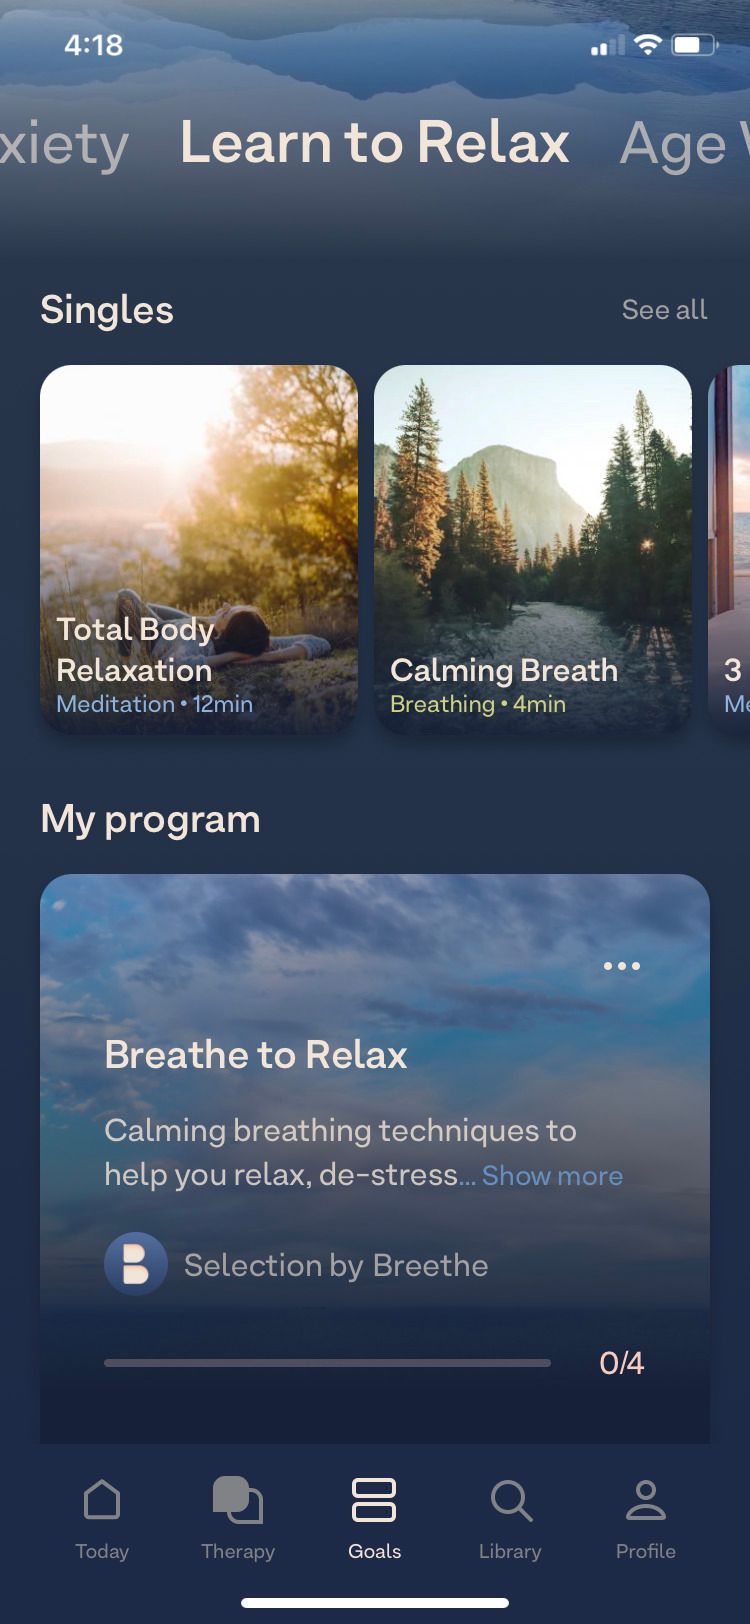 Breethe app Learn to Relax goal